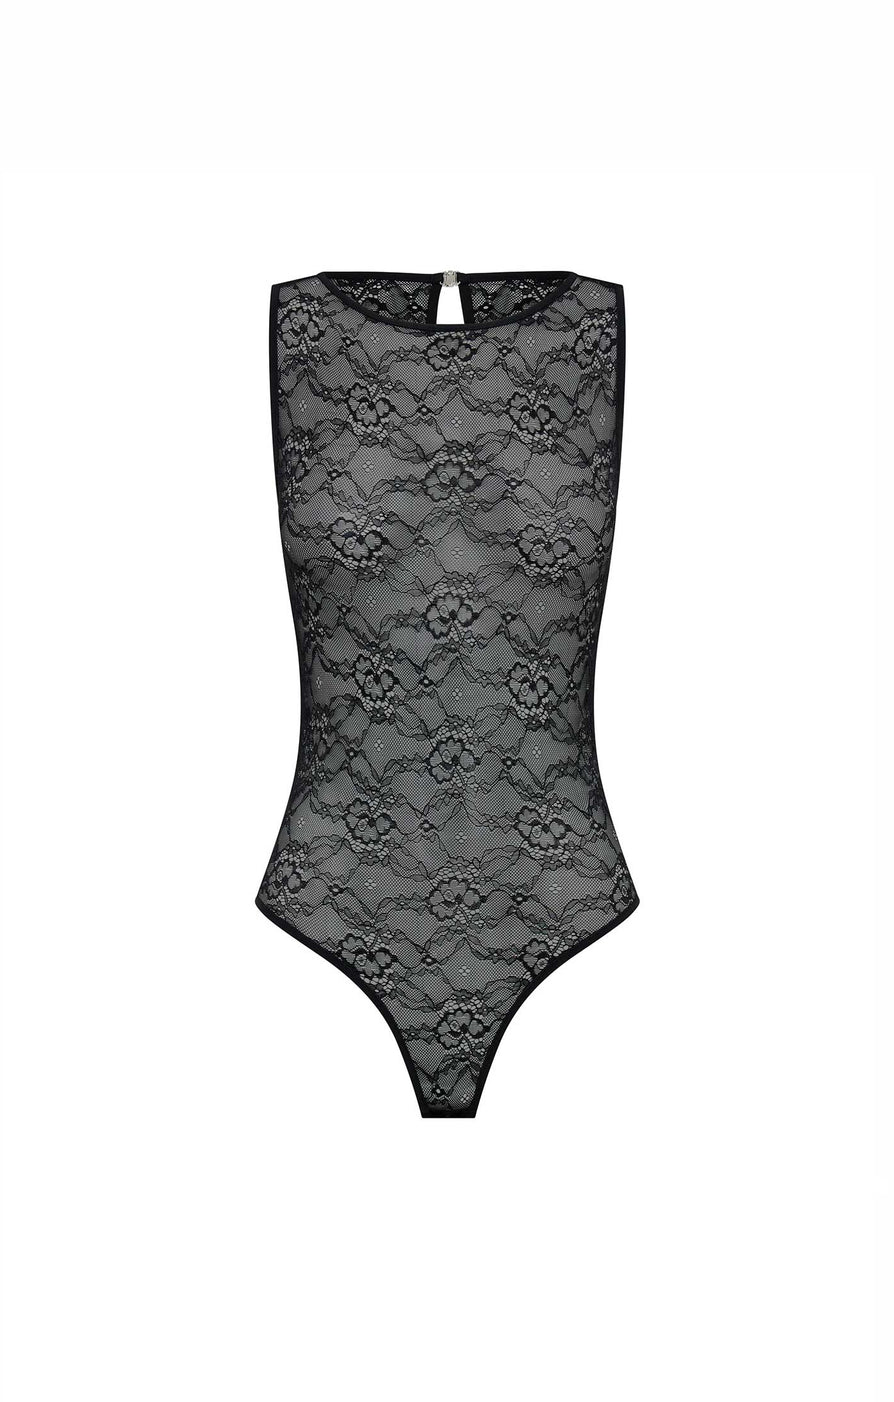 THE VERITY LACE BODYSUIT | ghost